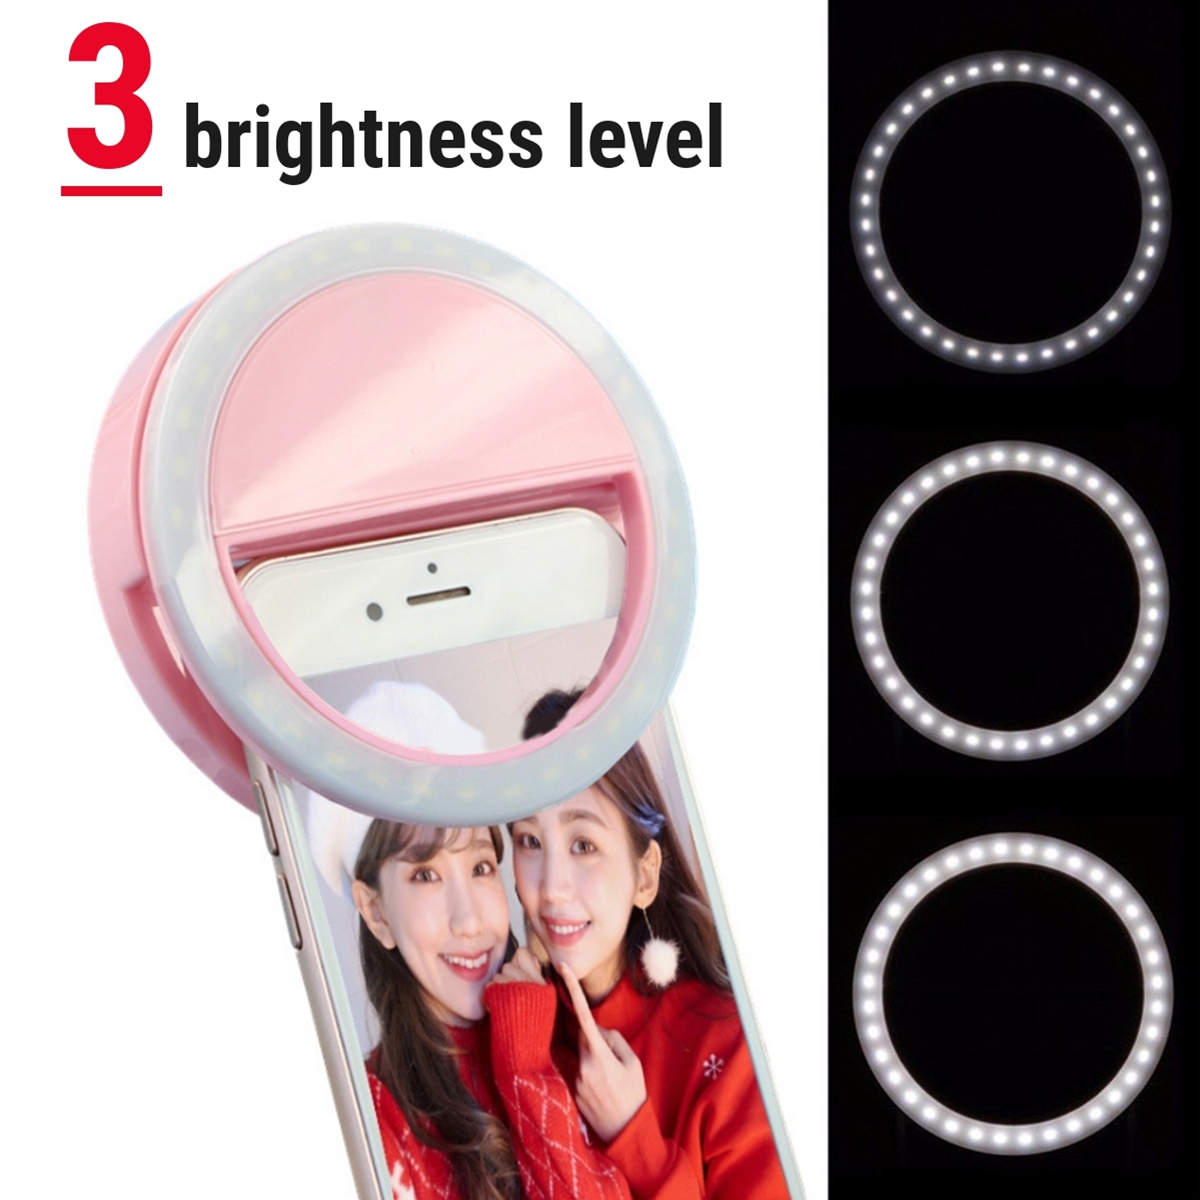 Bakeey-Selfie-36-LEDS-Fill-Lamp-Ring-Light-Universal-Clip-3-levels-Brightness-For-Cell-Phone-1715111-5